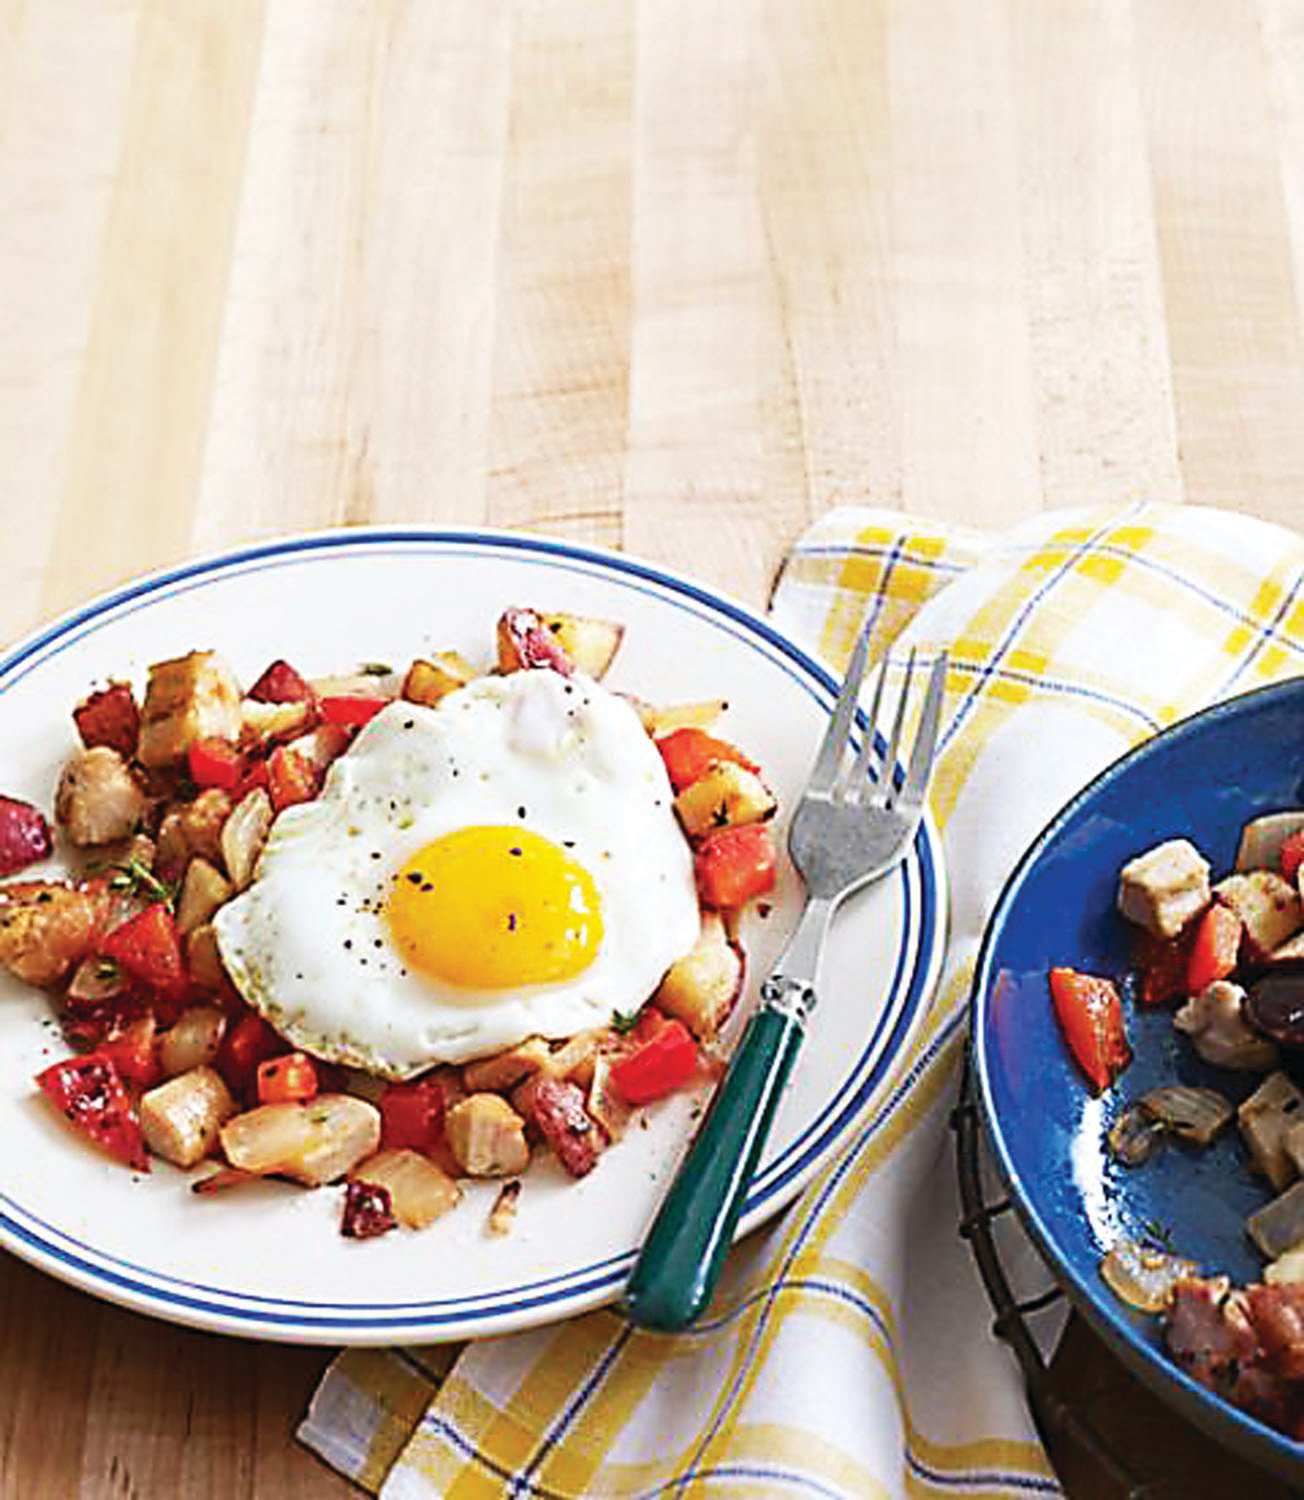 If turkey doesn’t sound like breakfast food, think again. This easy turkey hash is a great way to use up leftovers after the big feast.